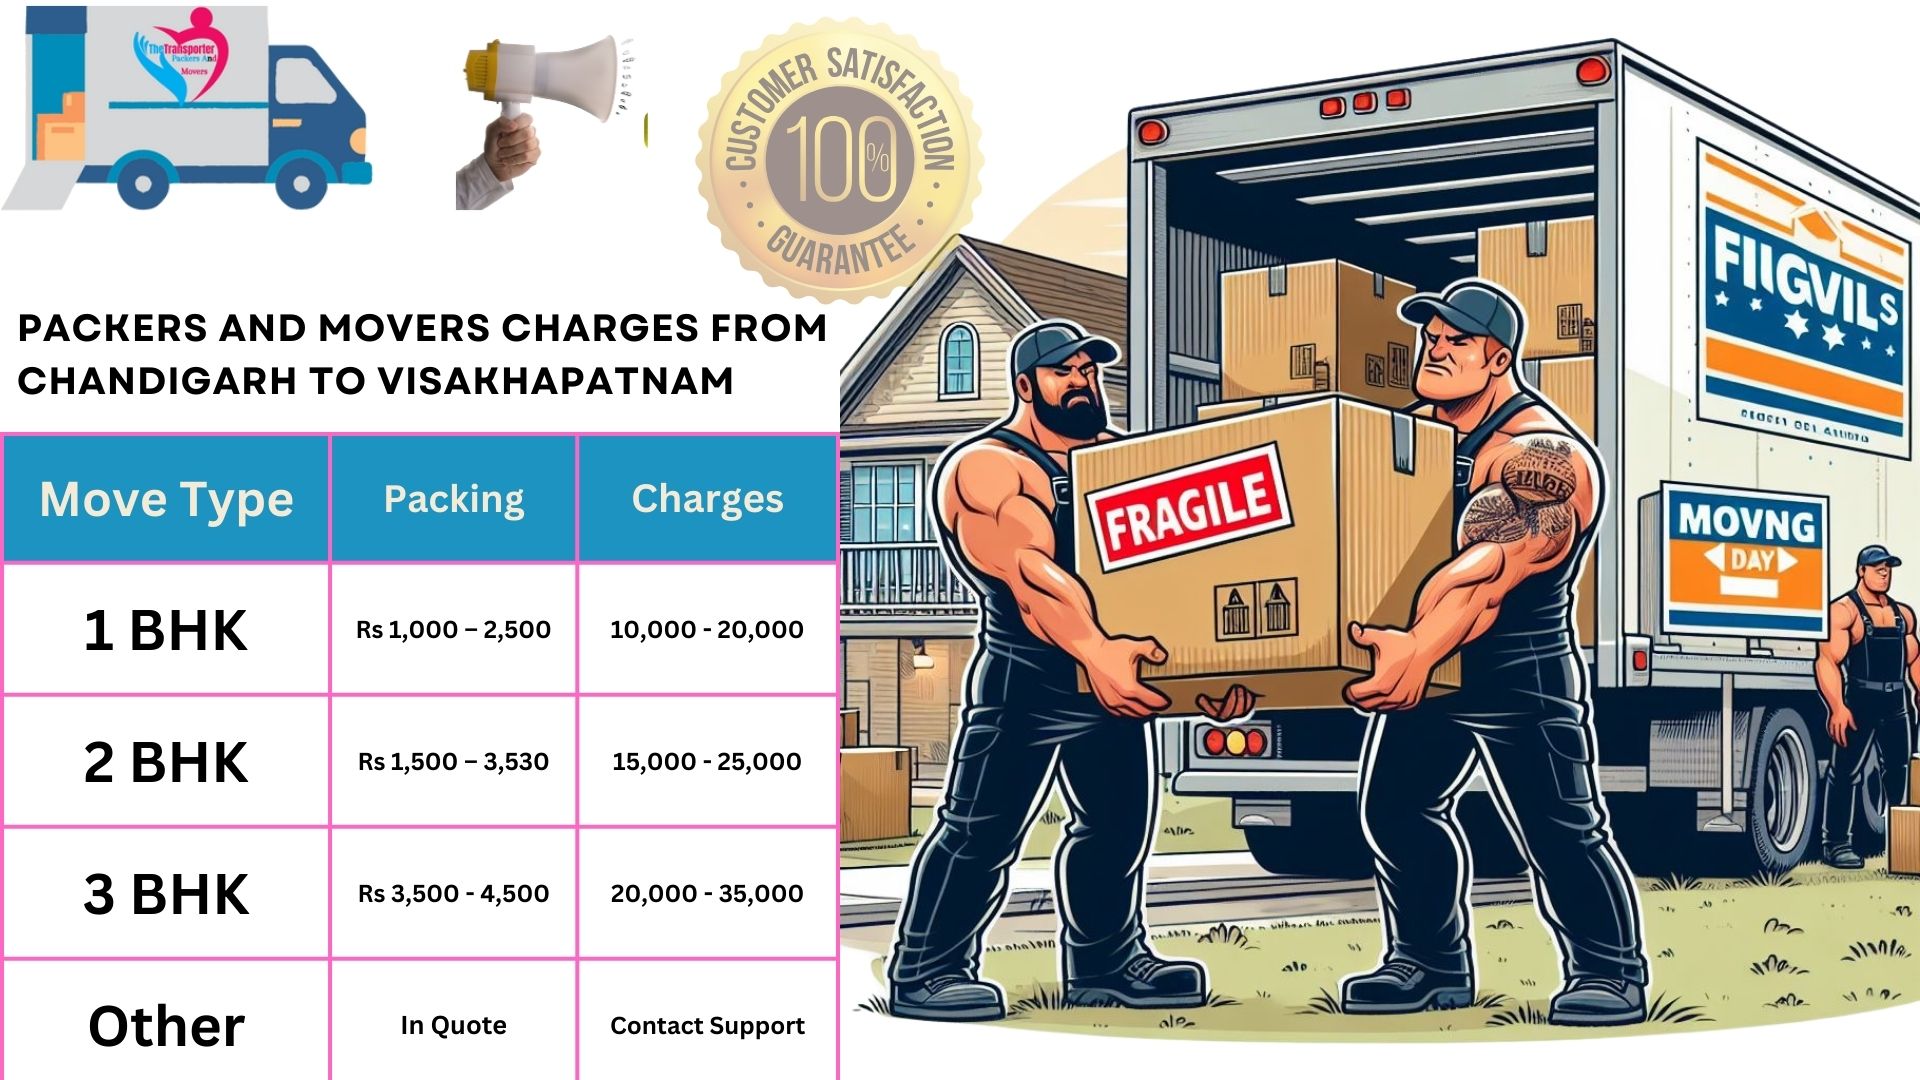 Packers and Movers cost list From Chandigarh to Visakhapatnam